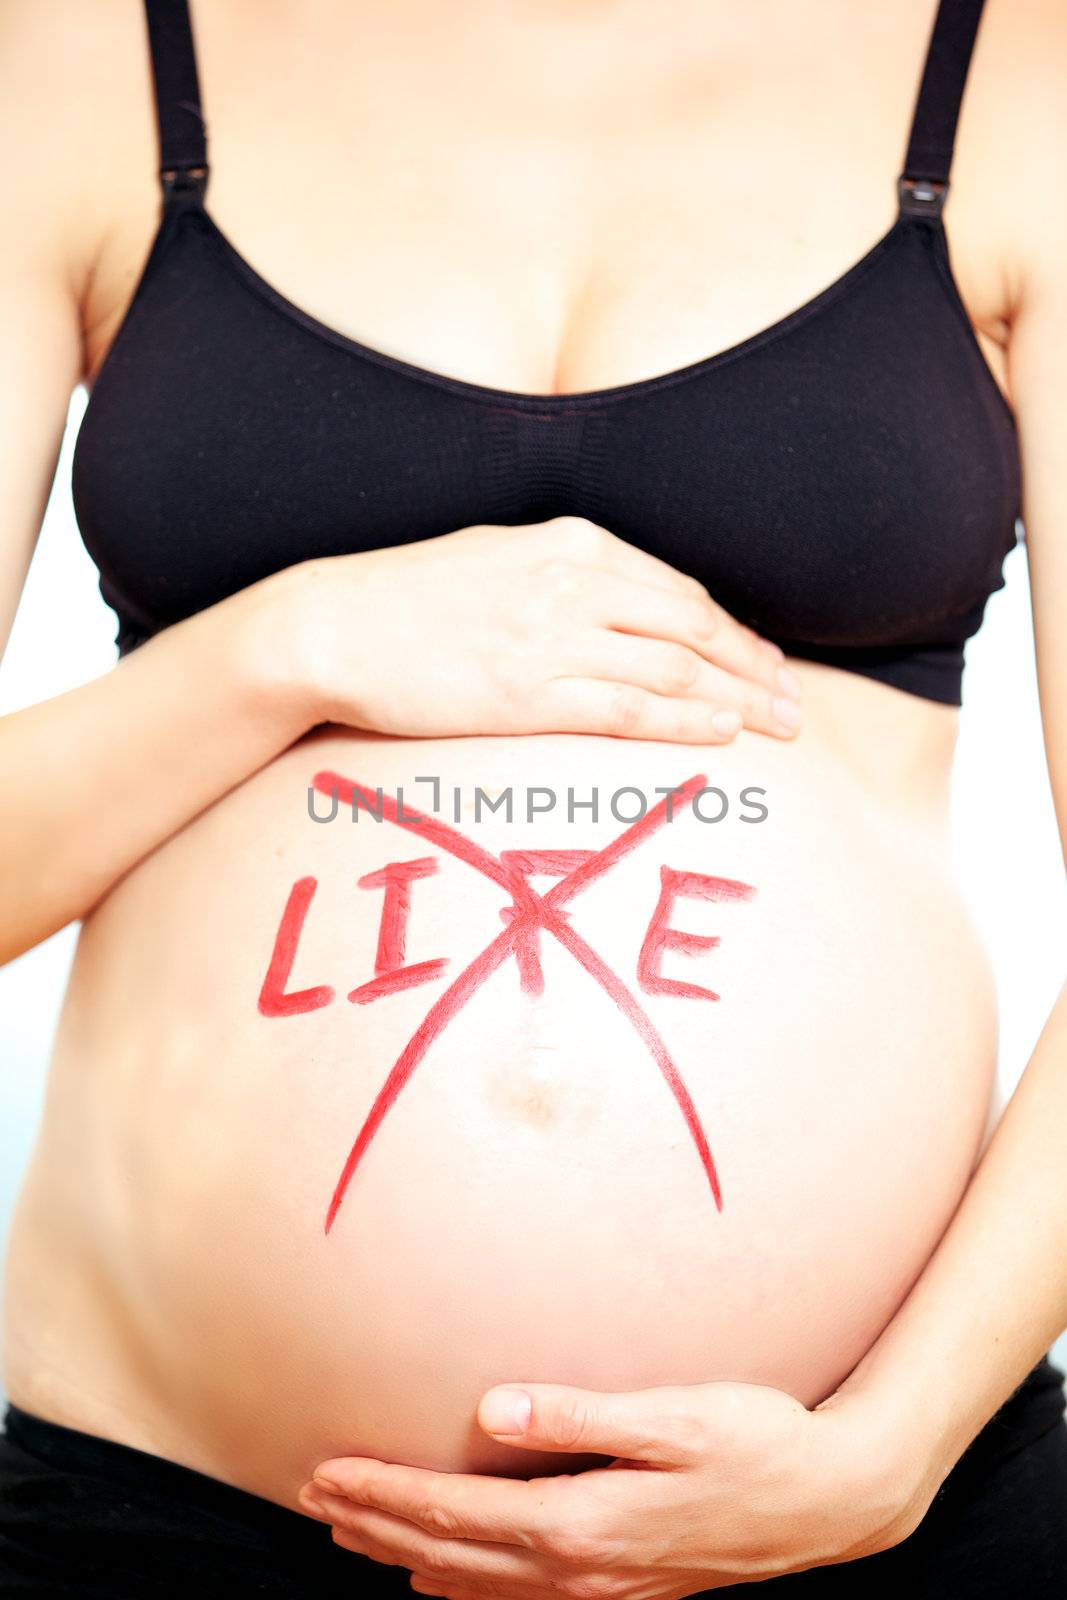 Pregnant lady showing her belly with Life written and crossed with marker on it.